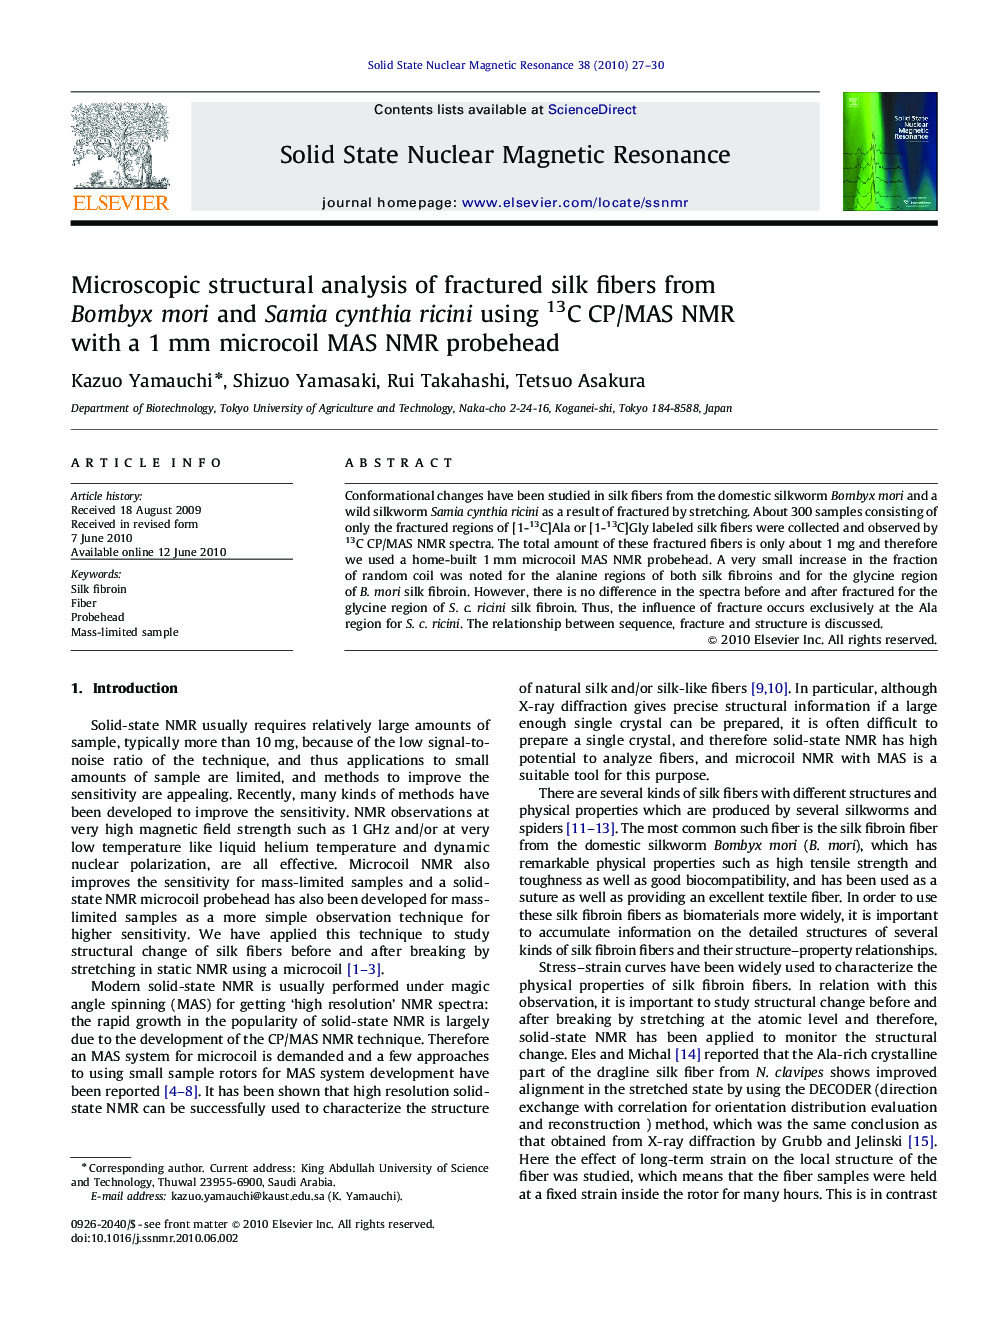 Microscopic structural analysis of fractured silk fibers from Bombyx mori and Samia cynthia ricini using 13C CP/MAS NMR with a 1Â mm microcoil MAS NMR probehead